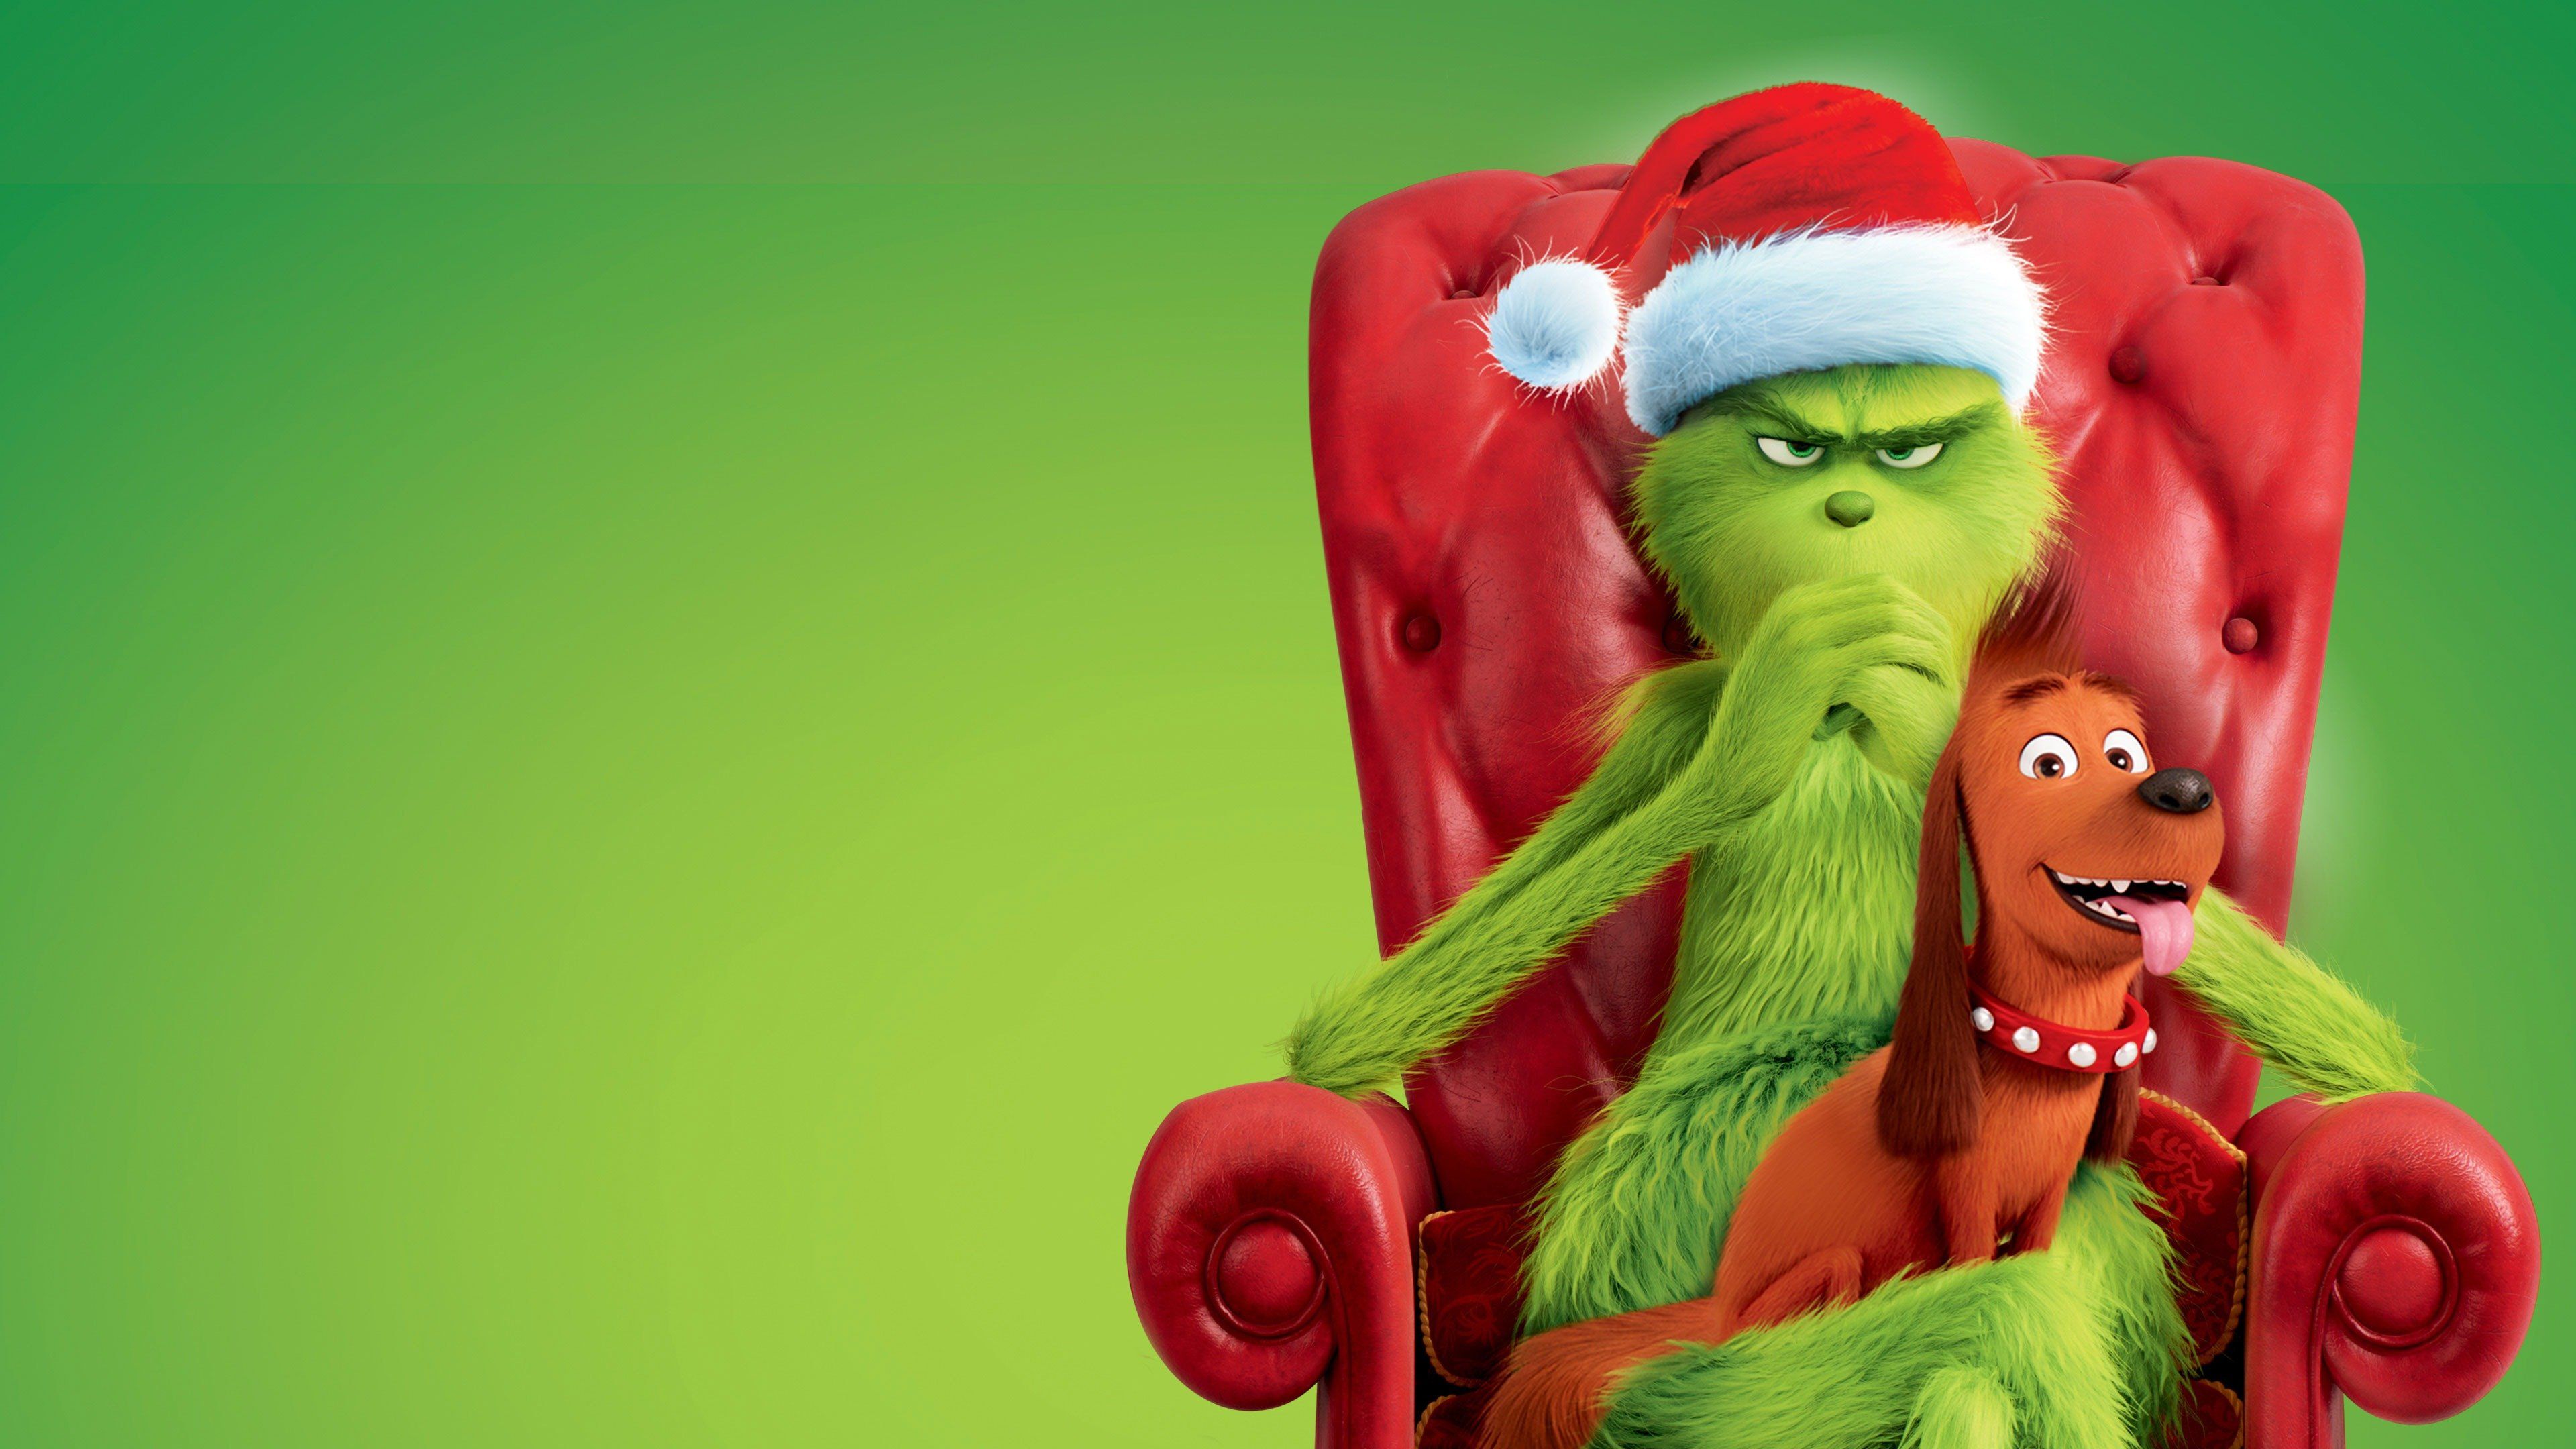 The Grinch wallpaper with Grinch and Max   Christmas wallpaper hd  Cute christmas wallpaper Christmas wallpaper